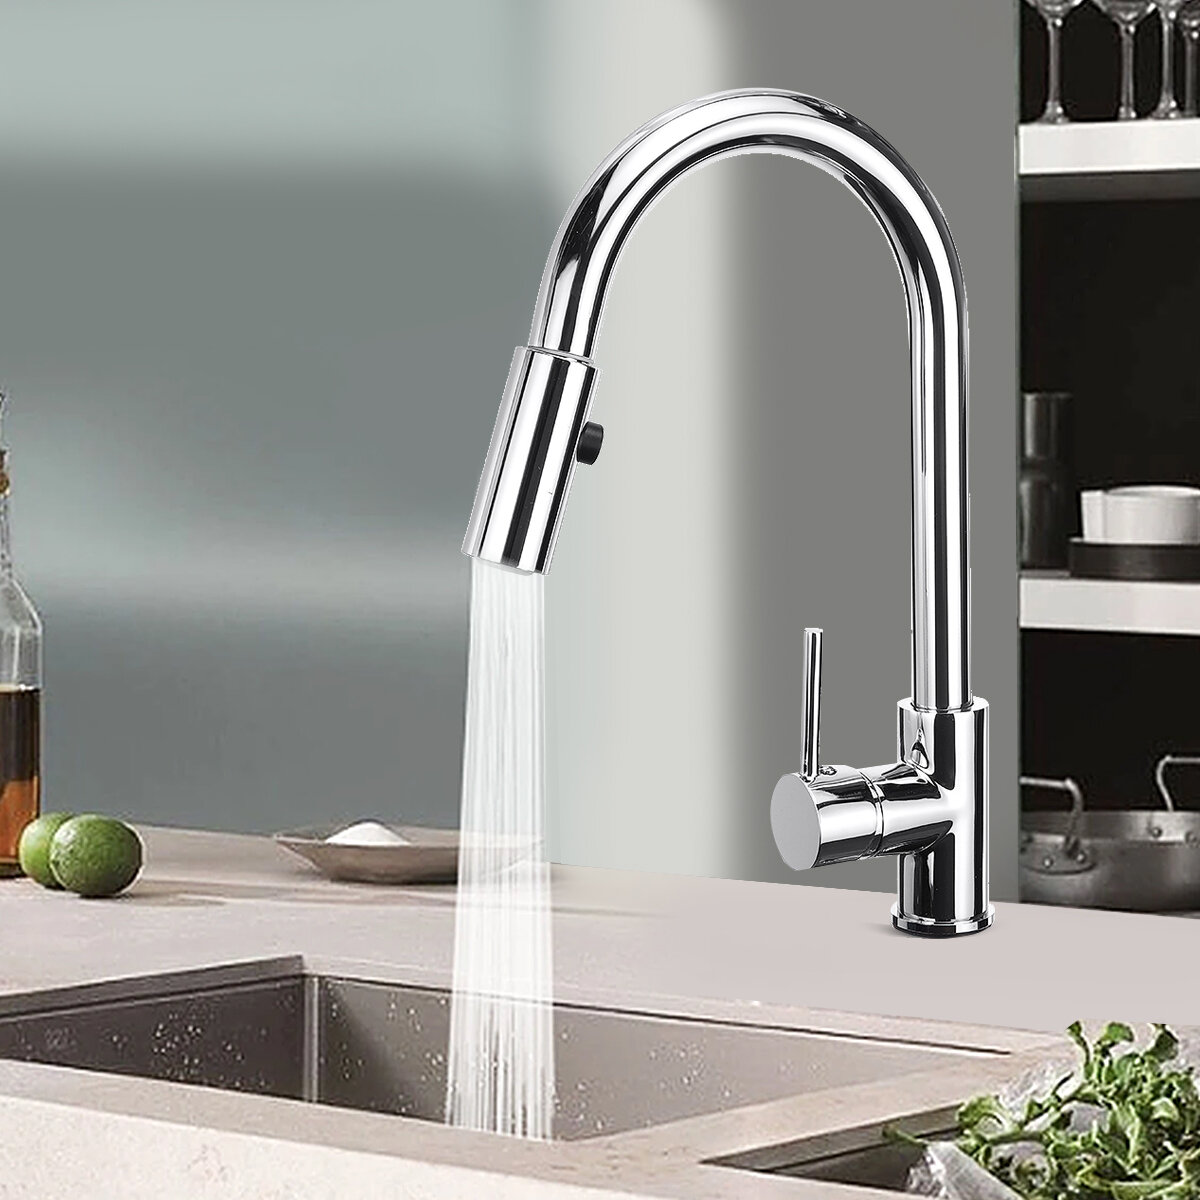 LanGuShi SLT0216 Nickel Brass Modern Mixer Tap Spring Single Smooth and Refined Friendly Design Lever Pull Out Spray Kitchen Bathroom Faucet Kitchen Taps 